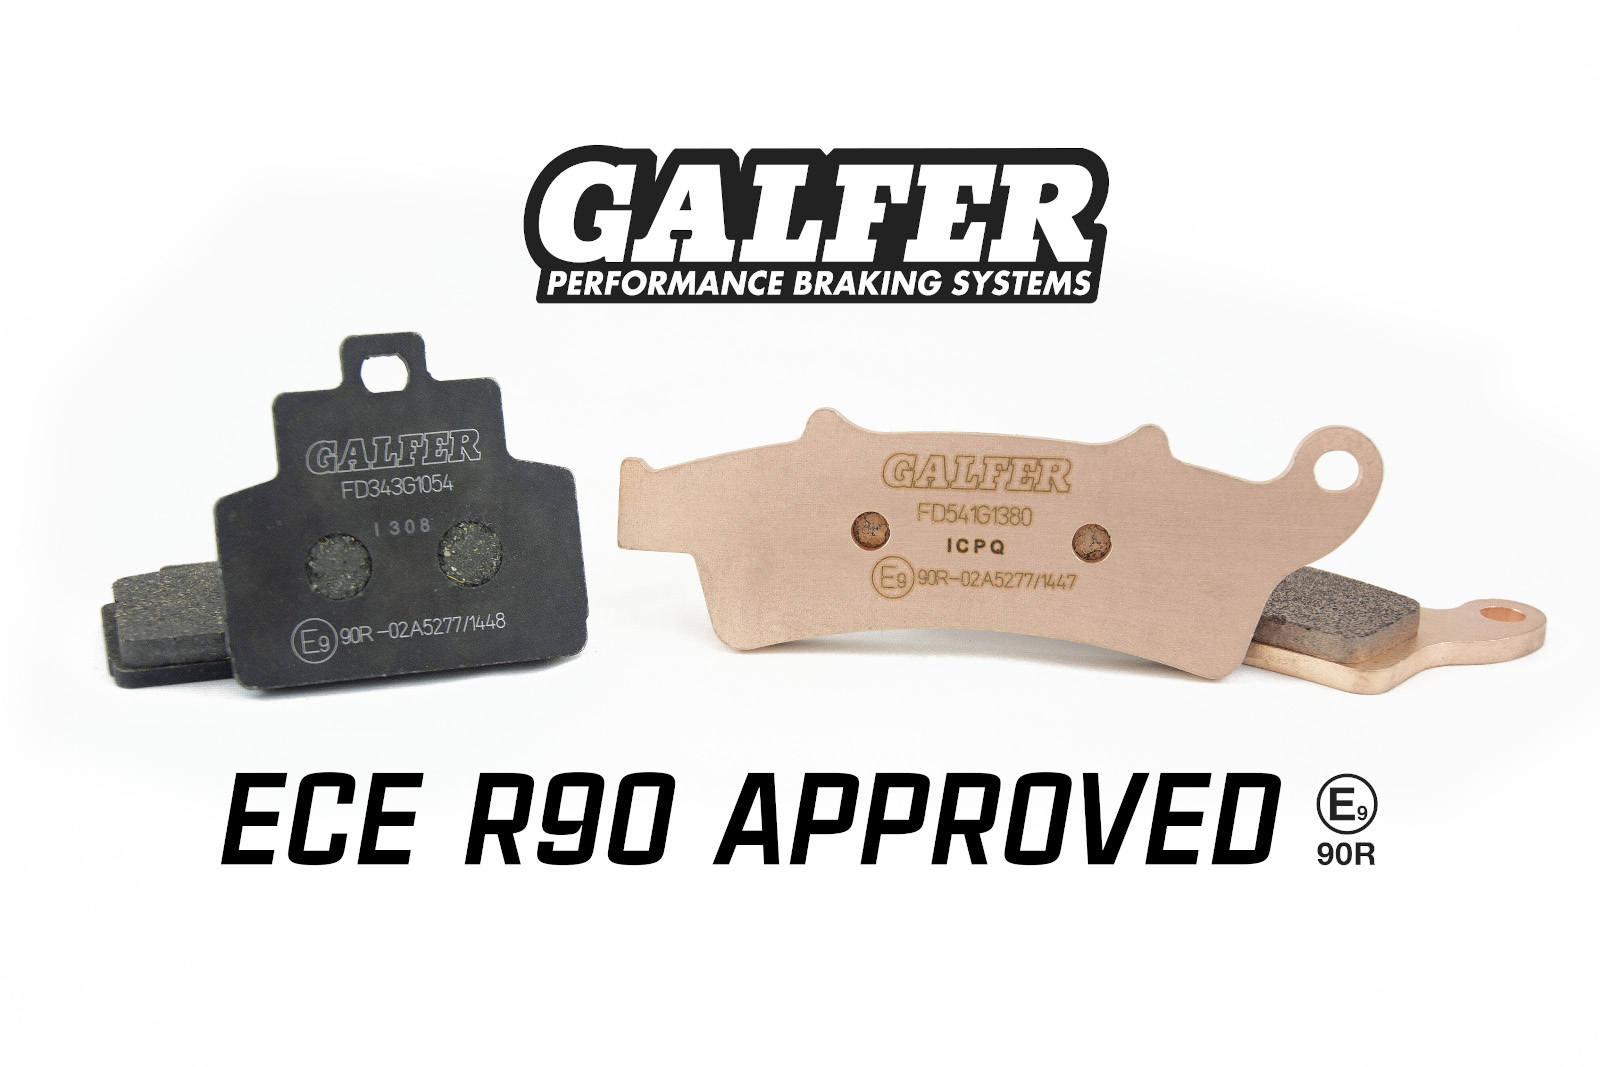 Galfer obtains ECE R90 certification for its brake pads